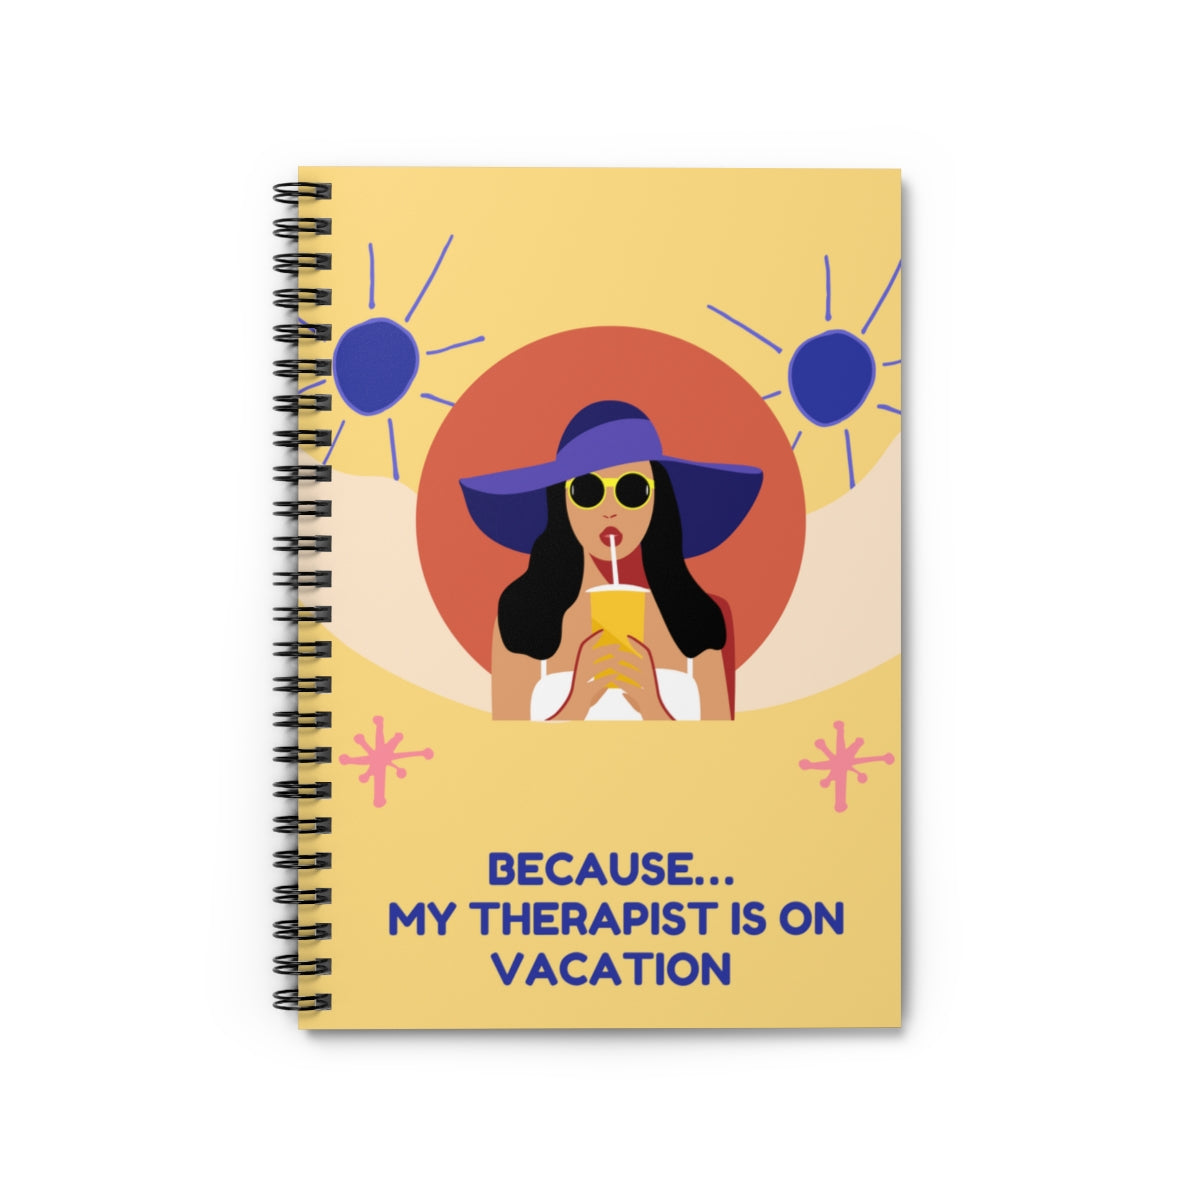 Because My Therapist is on Vacation Spiral Journal